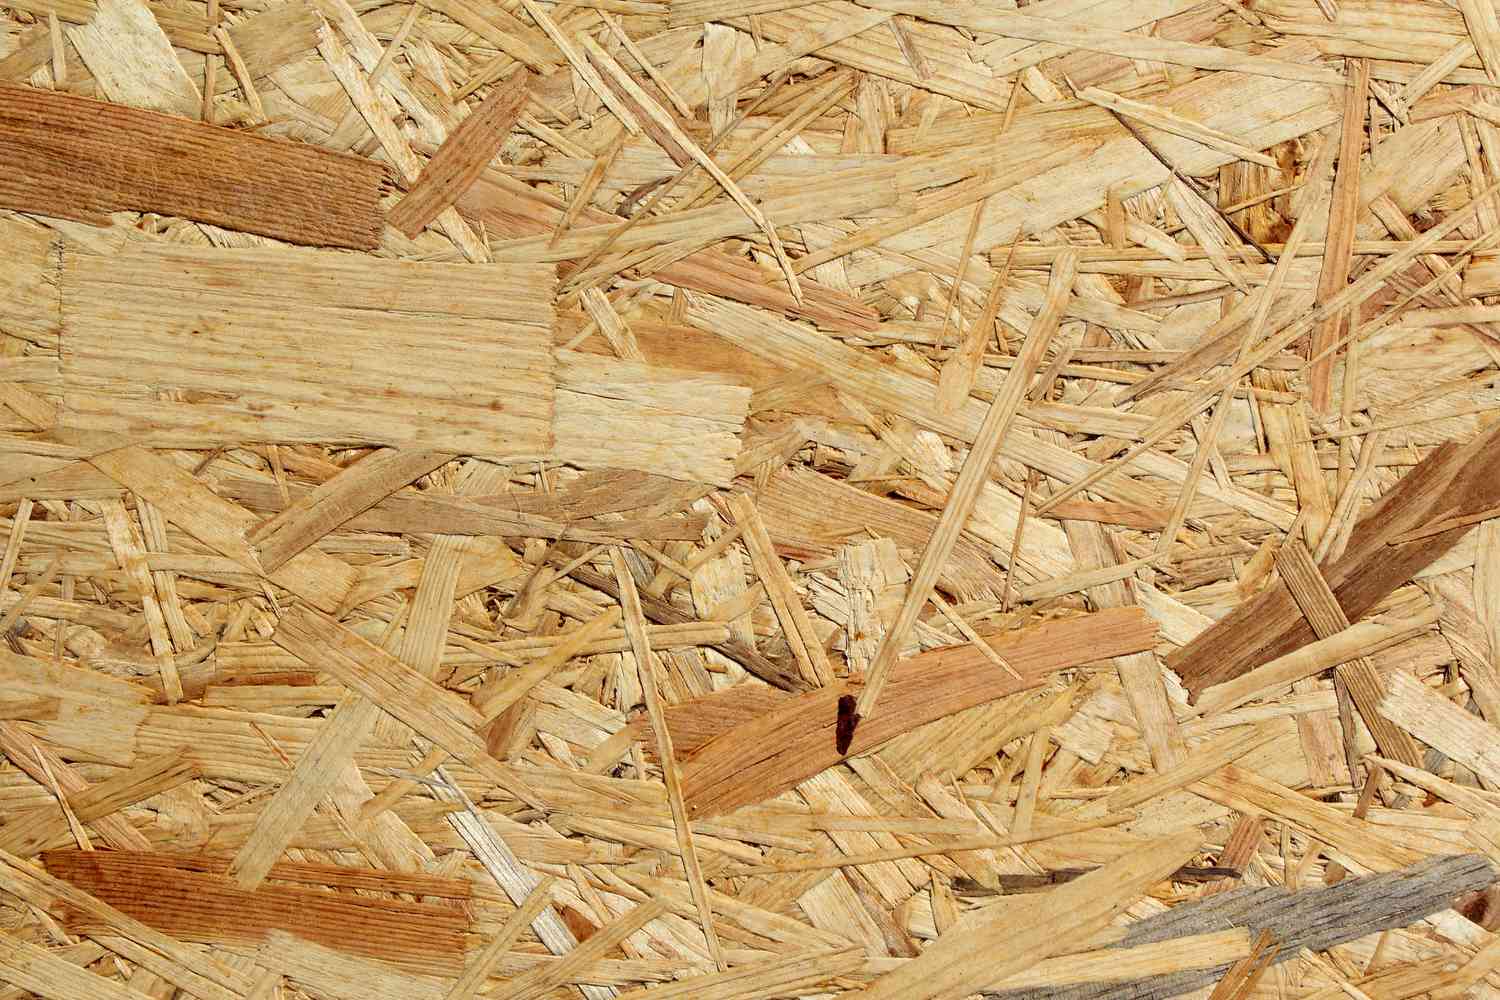 A close-up of particle board